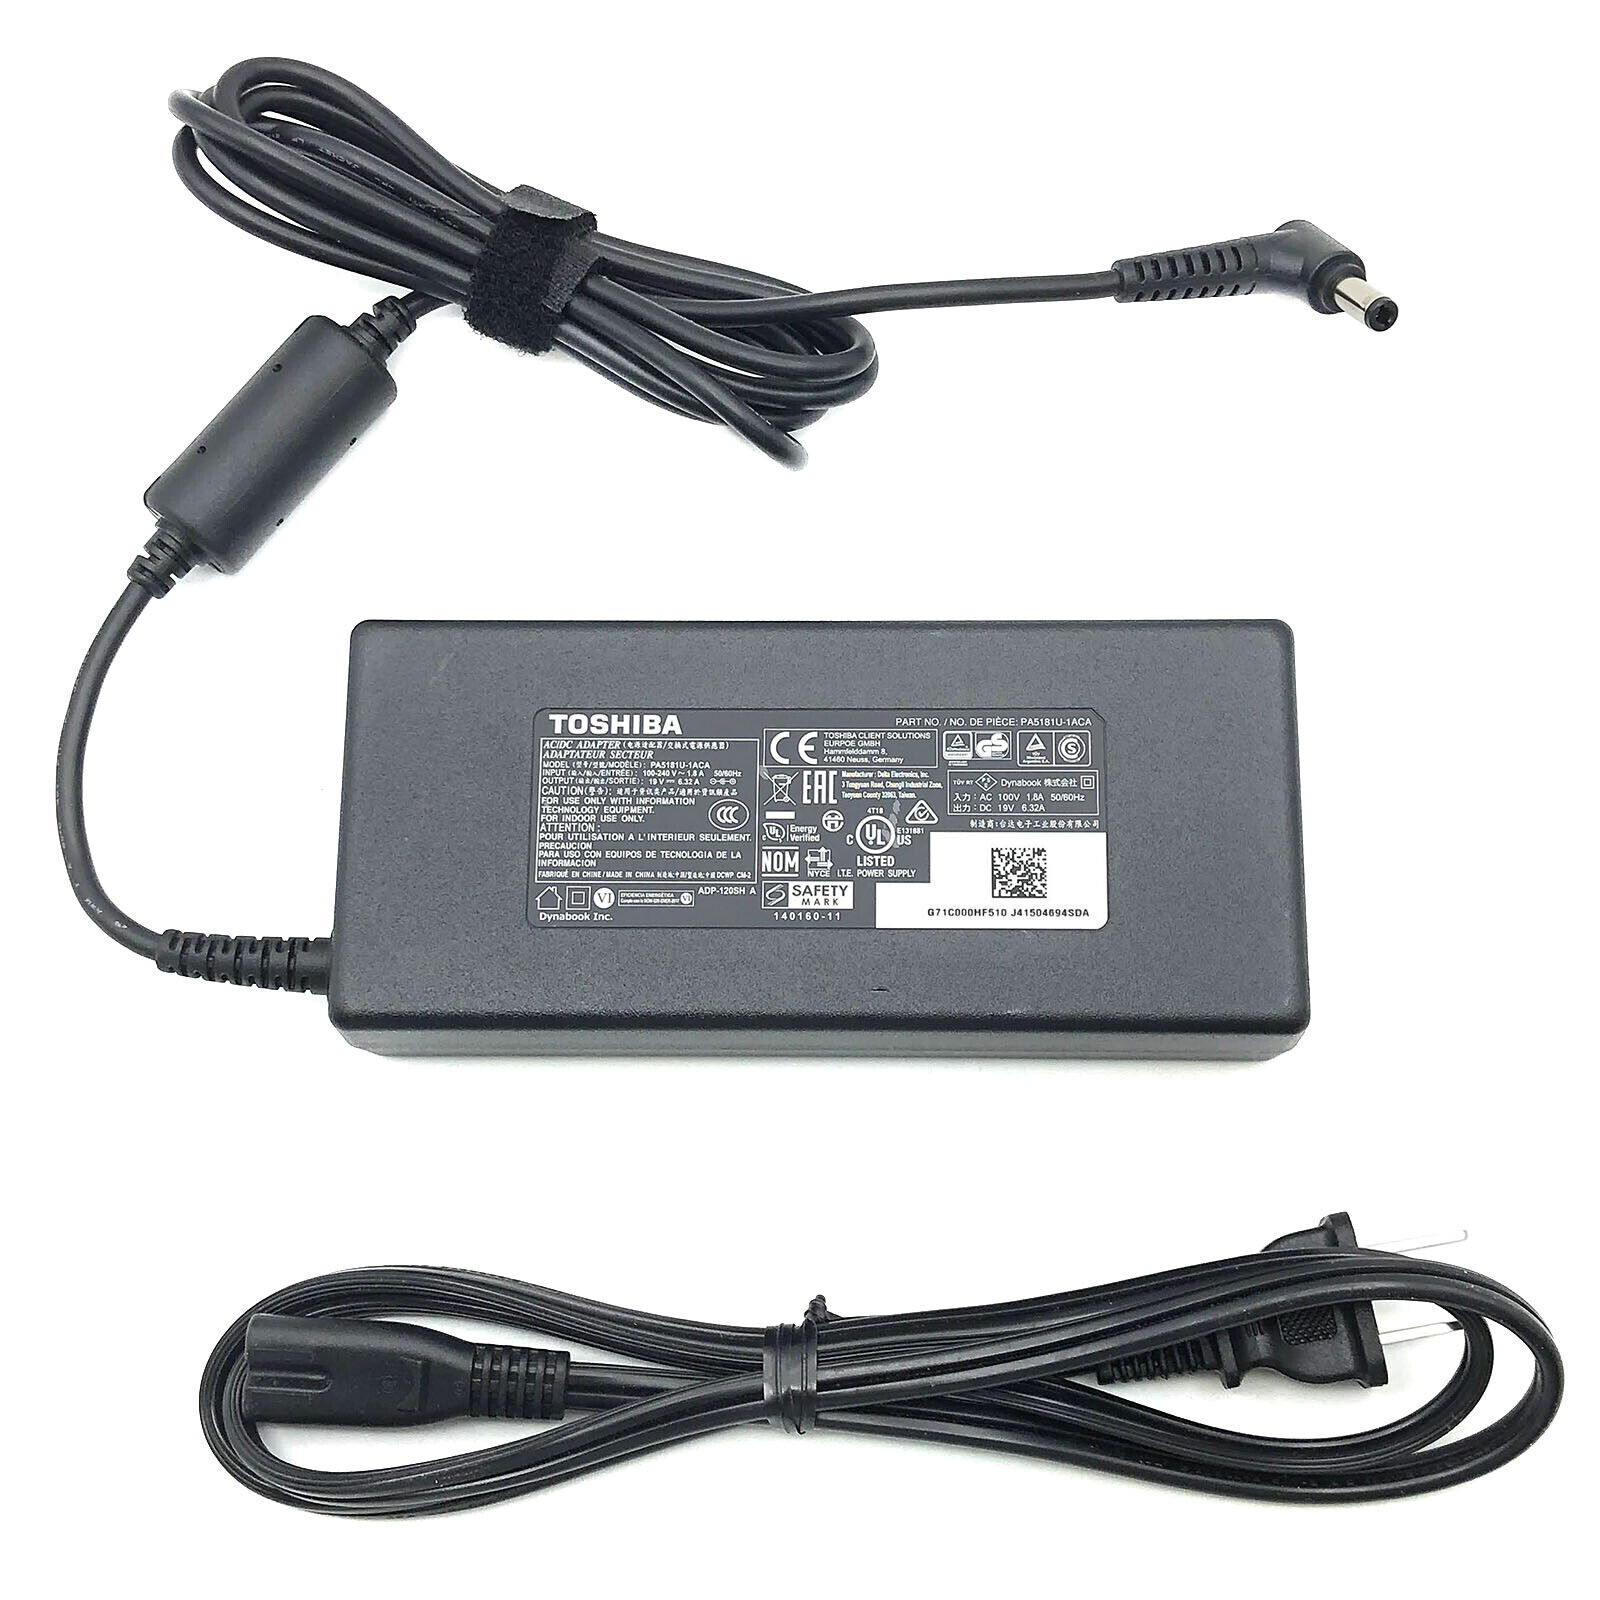 NEW OEM AC Adapter for Toshiba Satellite A65-S1062 A70-S256 A505 A60-158 W/Cord